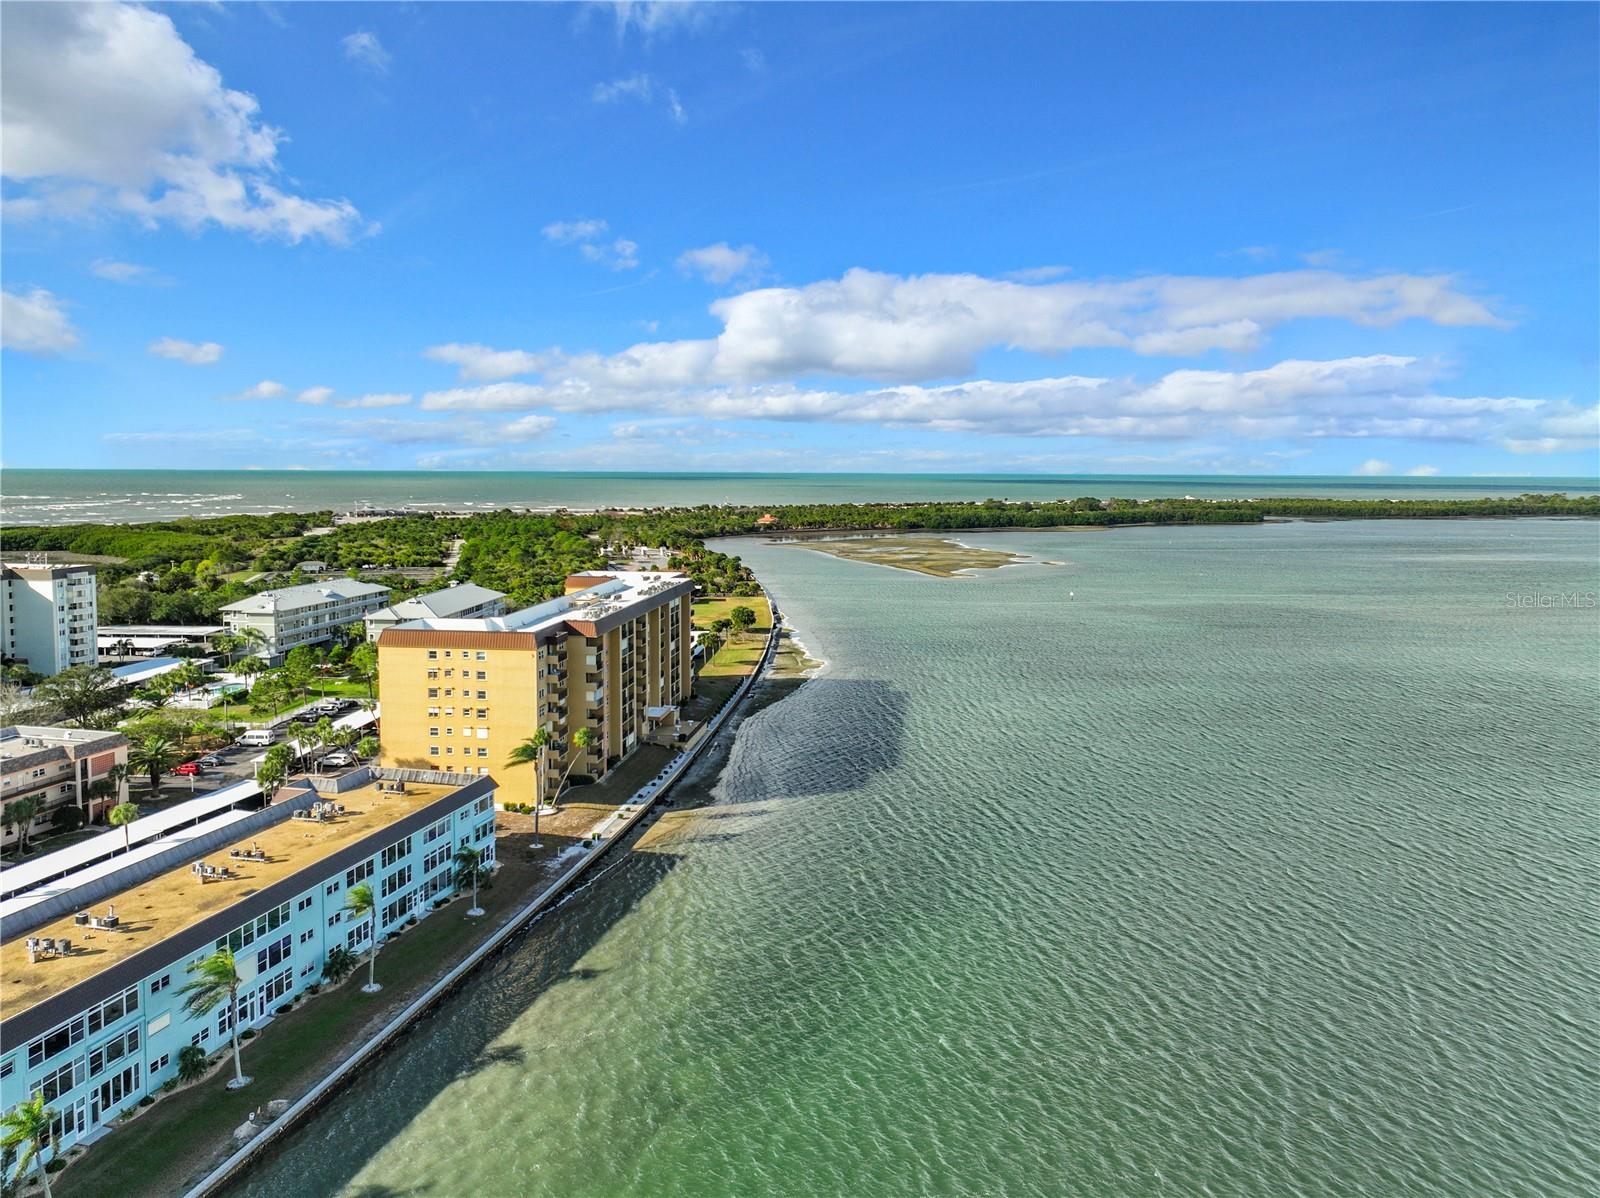 Aerial view of rear of buidling with Honeymoon Island in the distance